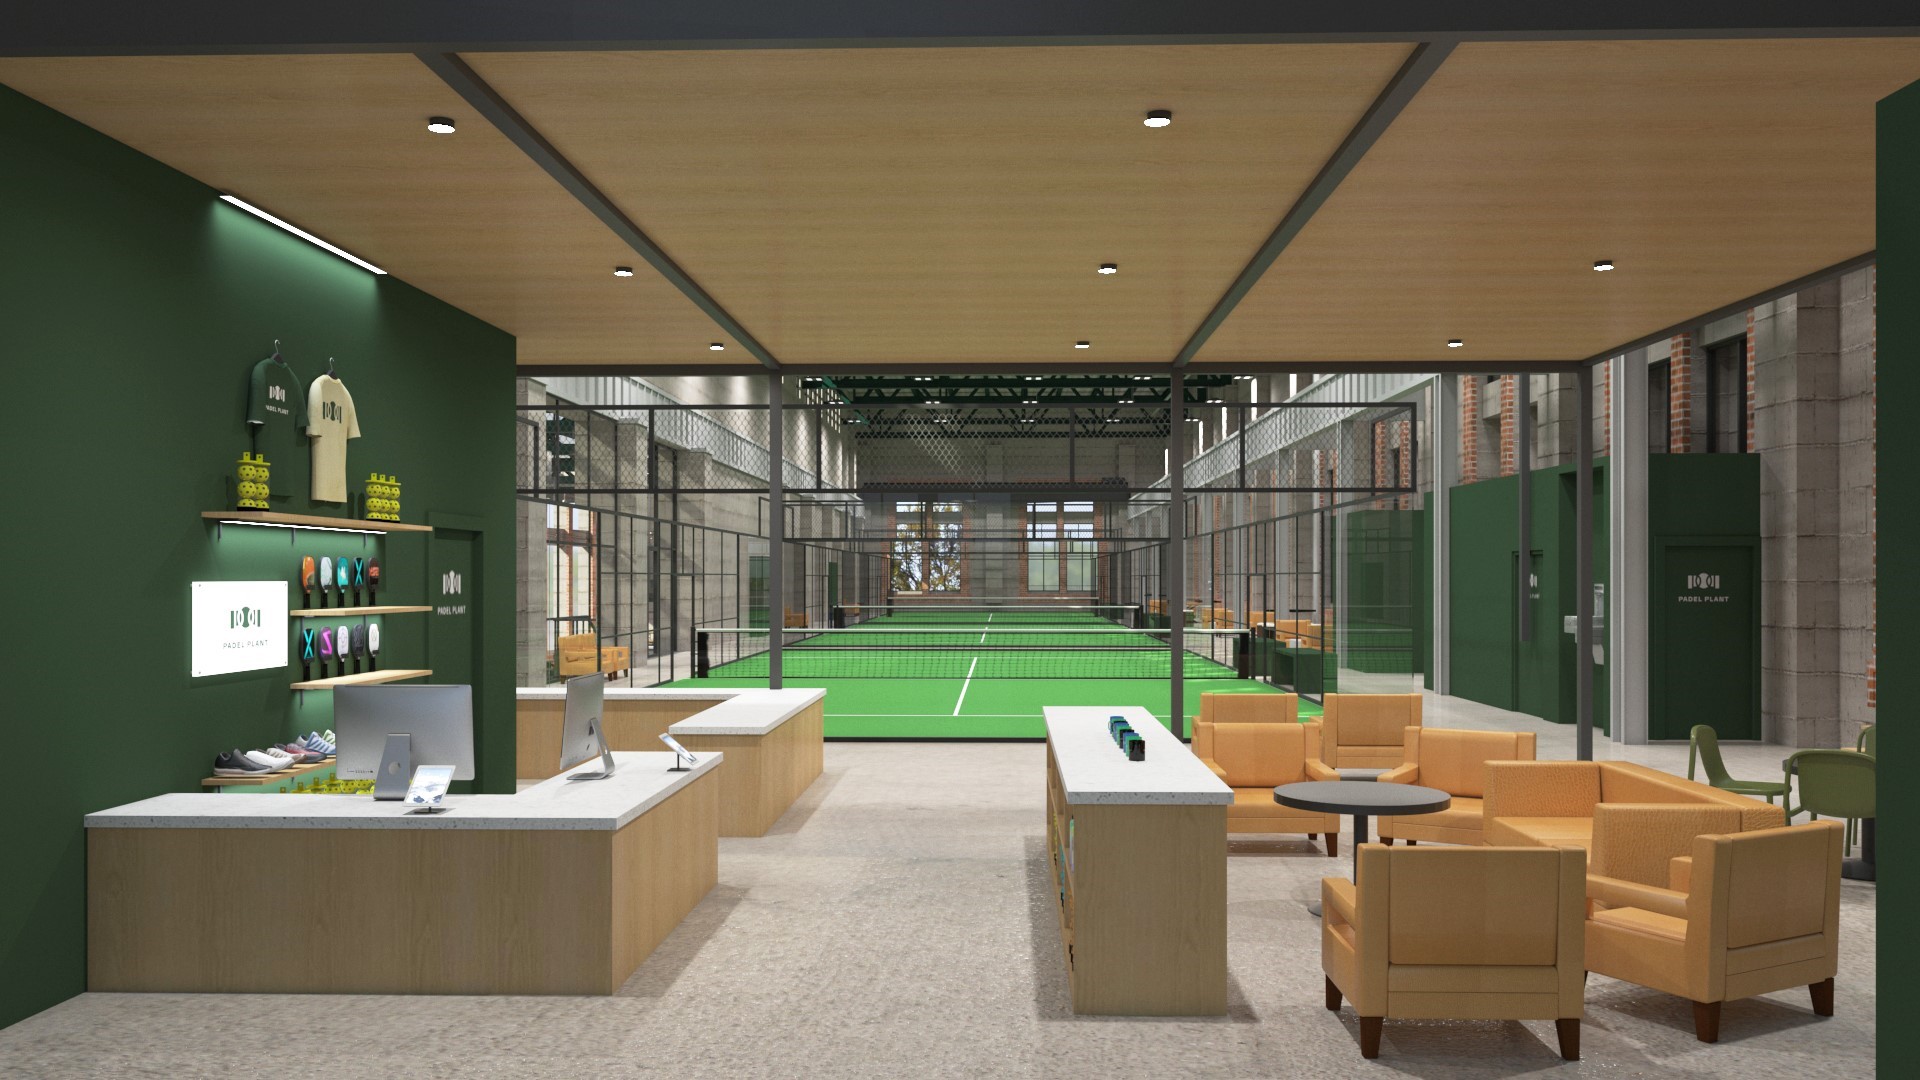 Rendering of the Padel Plant. Luxurious check in area, comfortable furniture, a huge mezzanine above, and stunning padel courts running down the main hall.